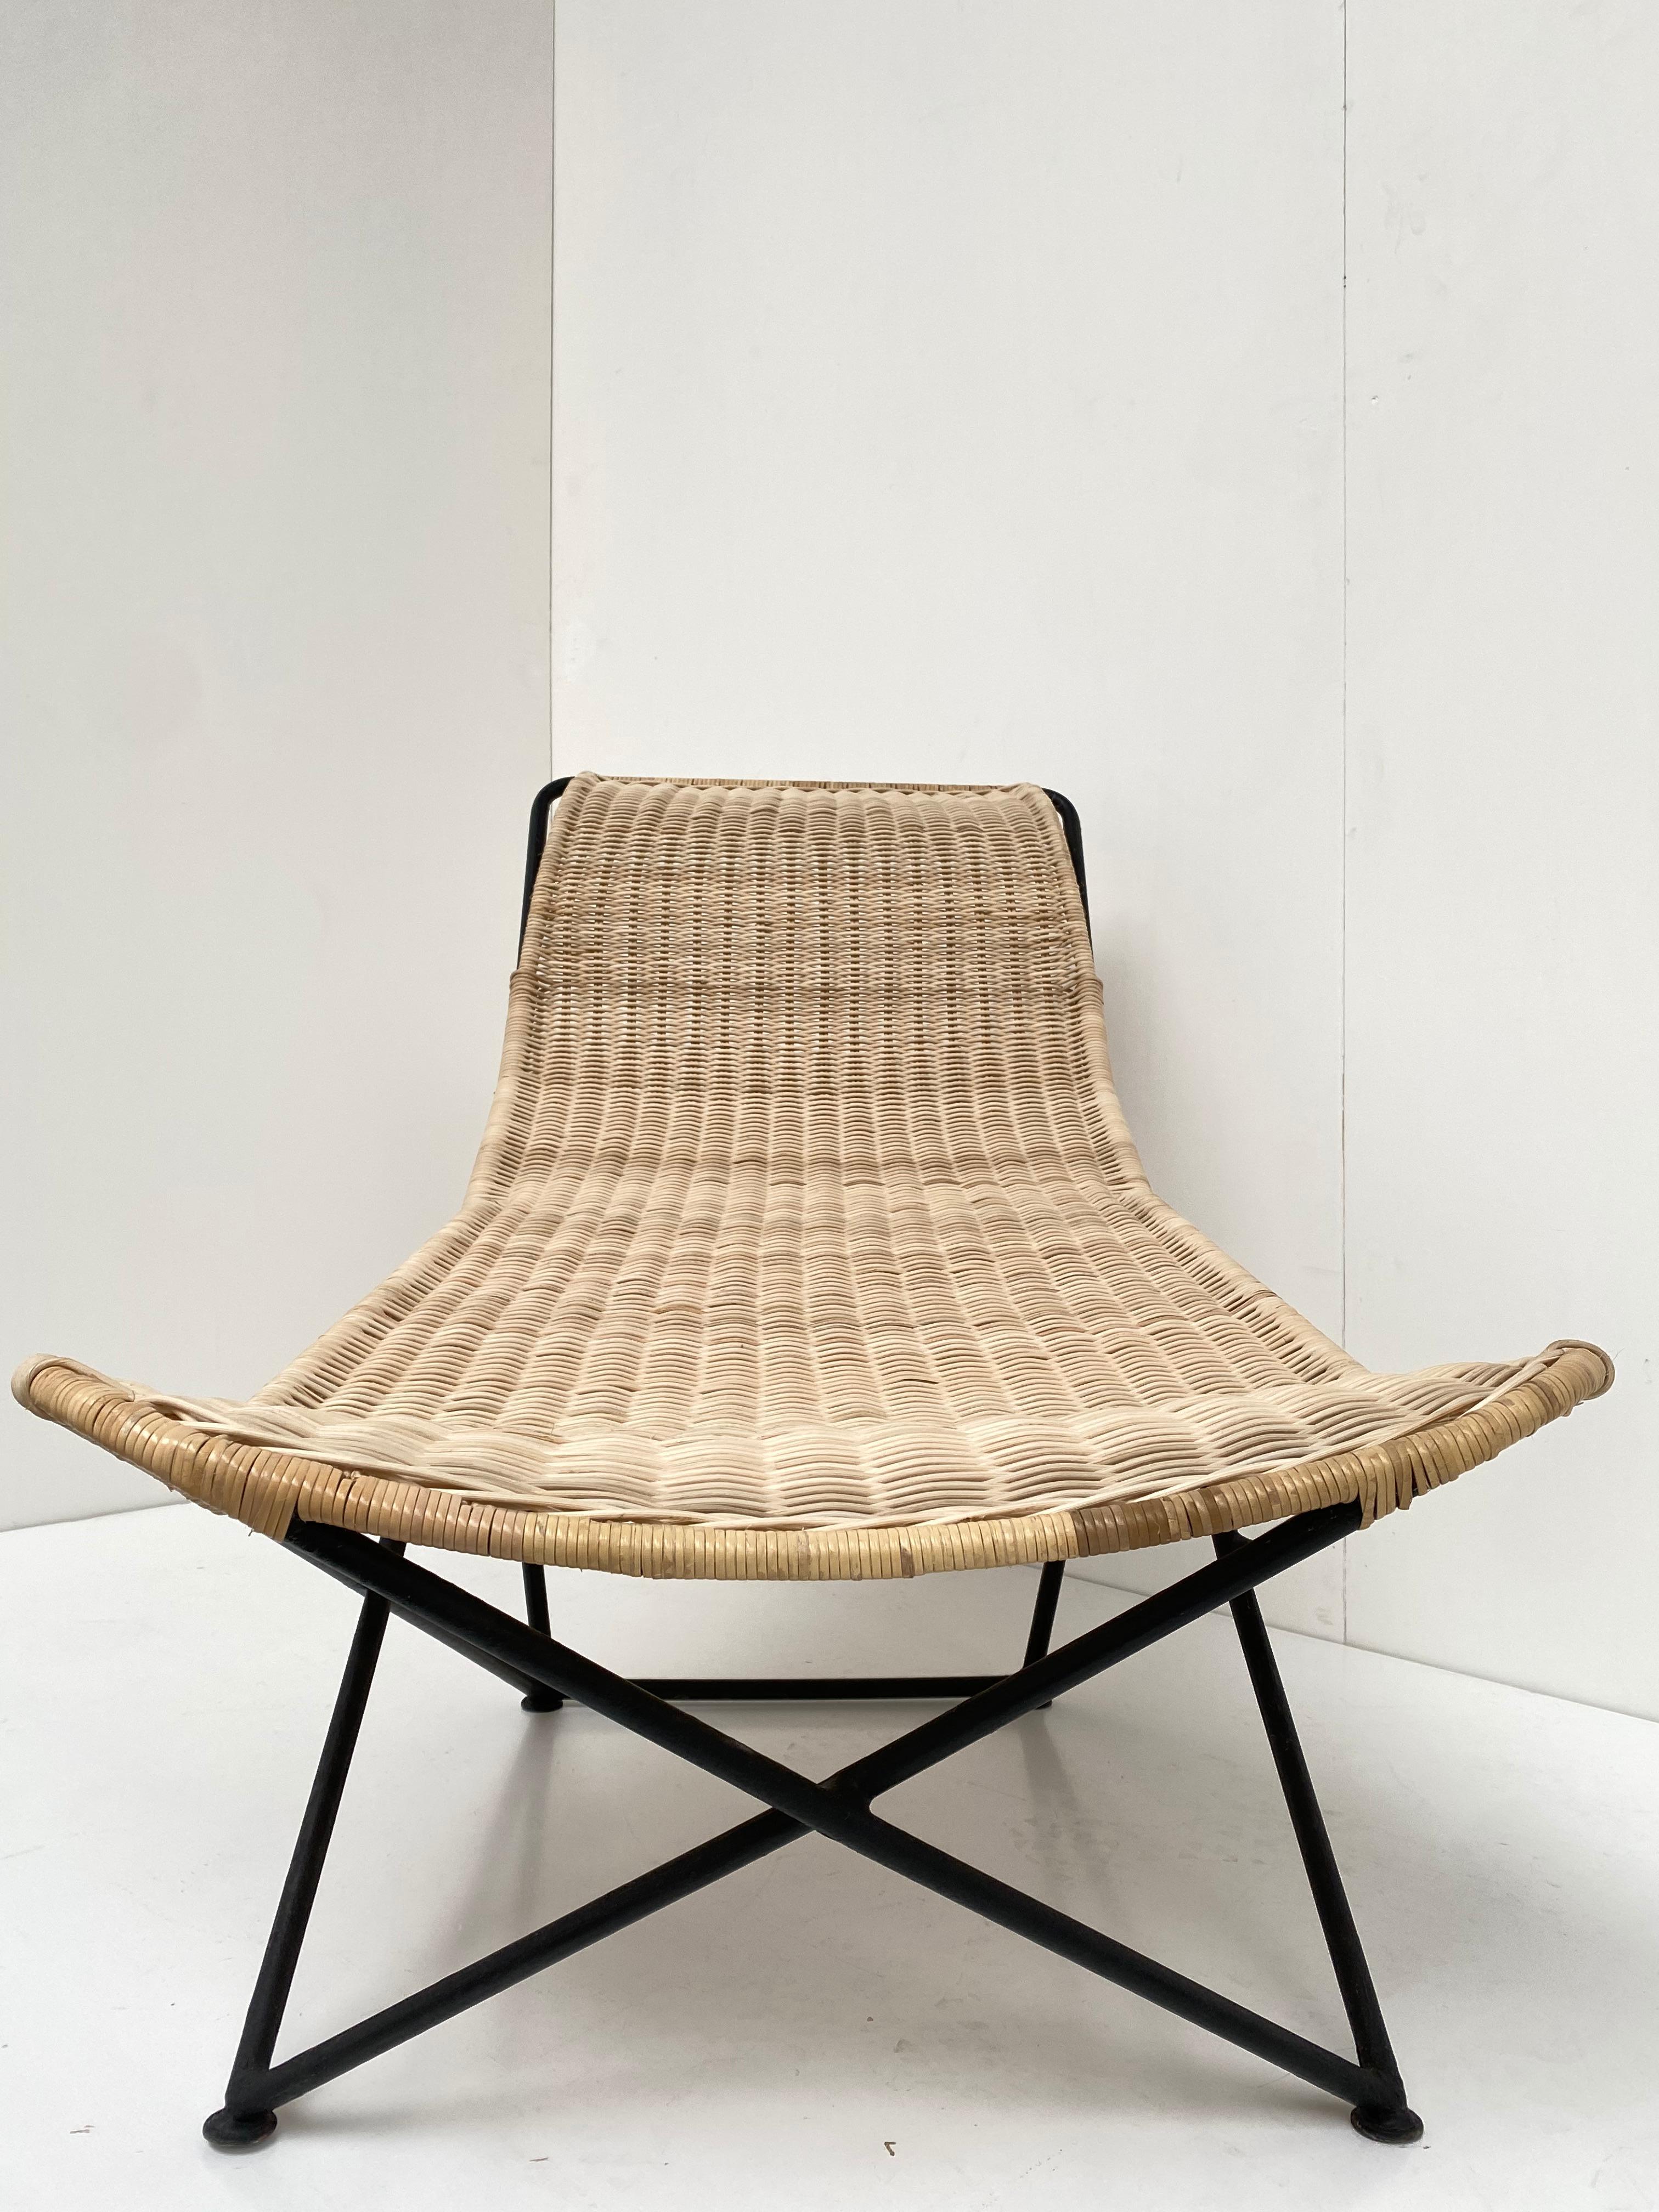 Enameled Stunning Sculptural Form Wicker Chaise Attributed to Raoul Guys, France, 1950's For Sale